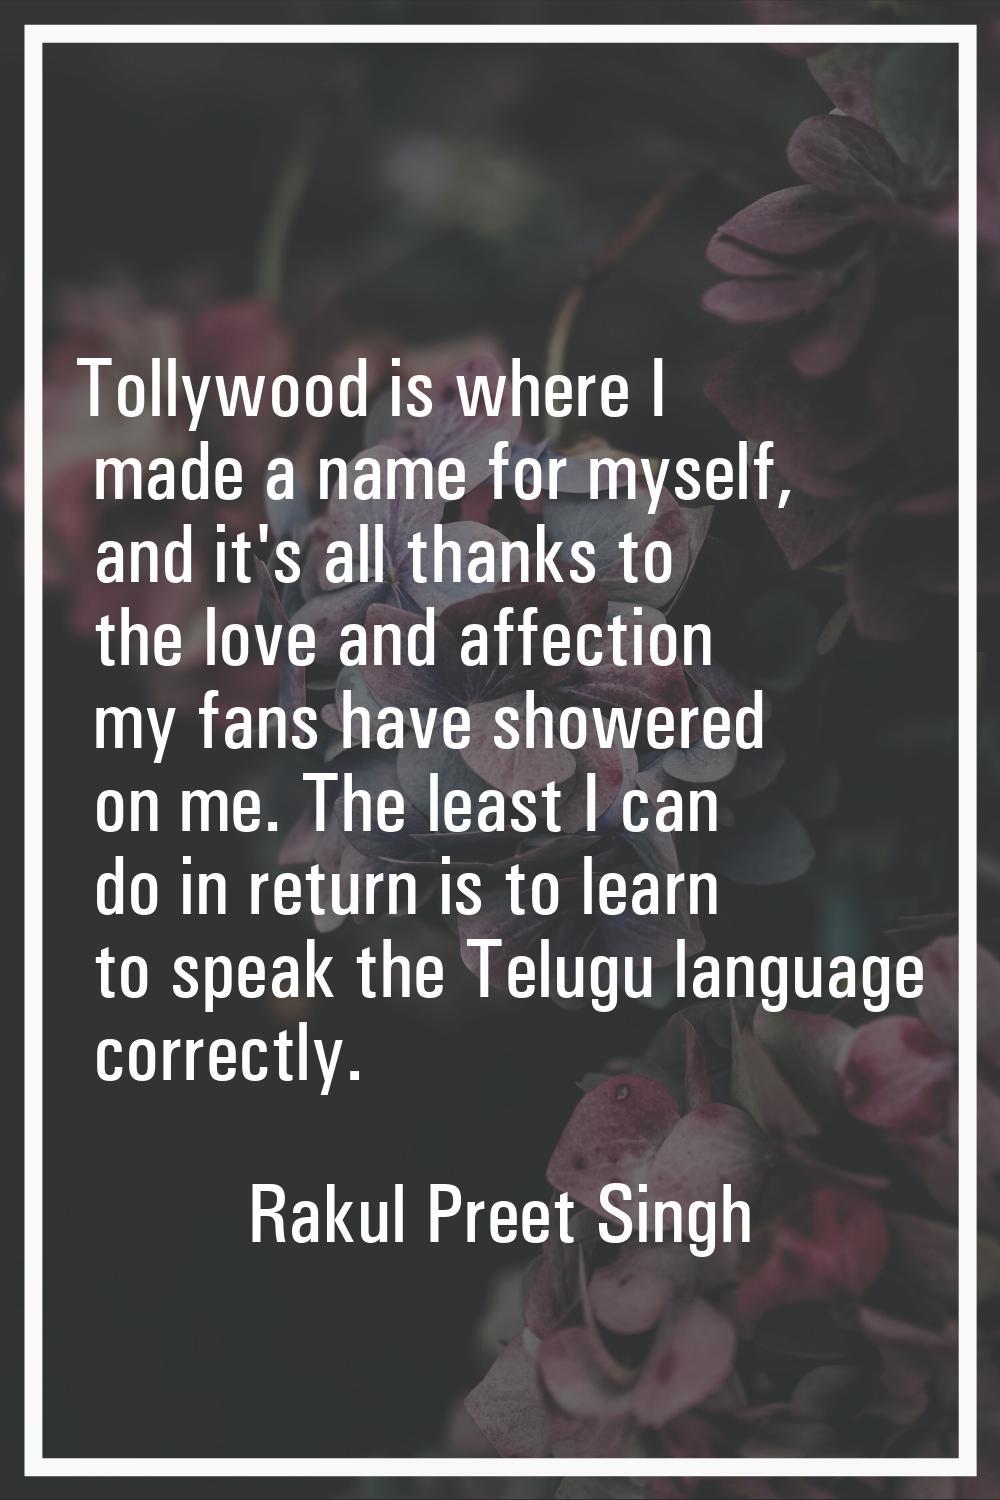 Tollywood is where I made a name for myself, and it's all thanks to the love and affection my fans 